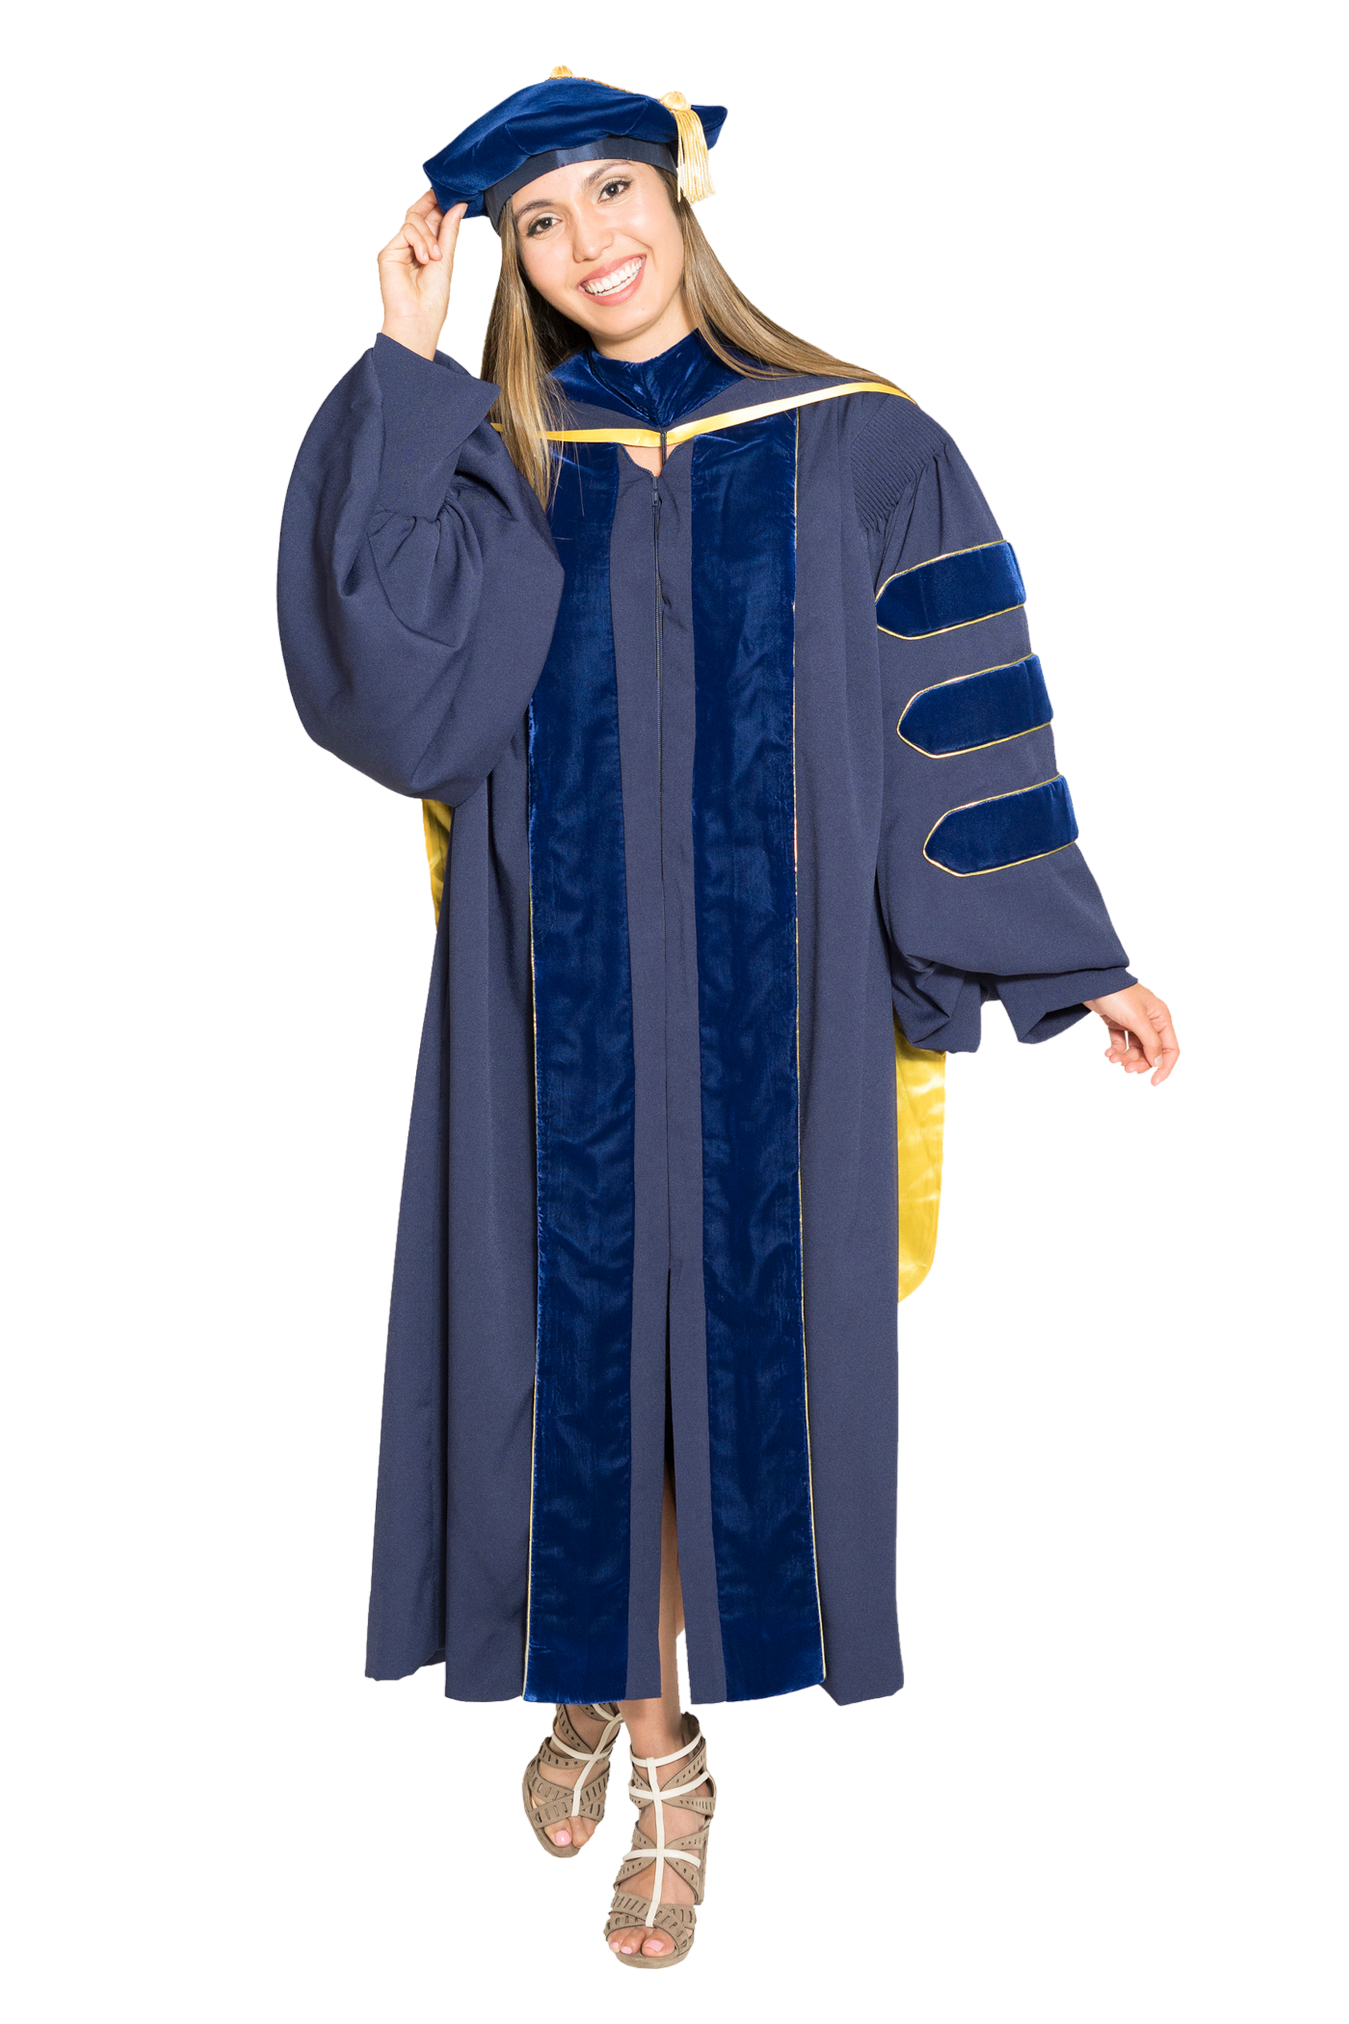 University of British Columbia - Doctorate Gown - Gaspard Online Store